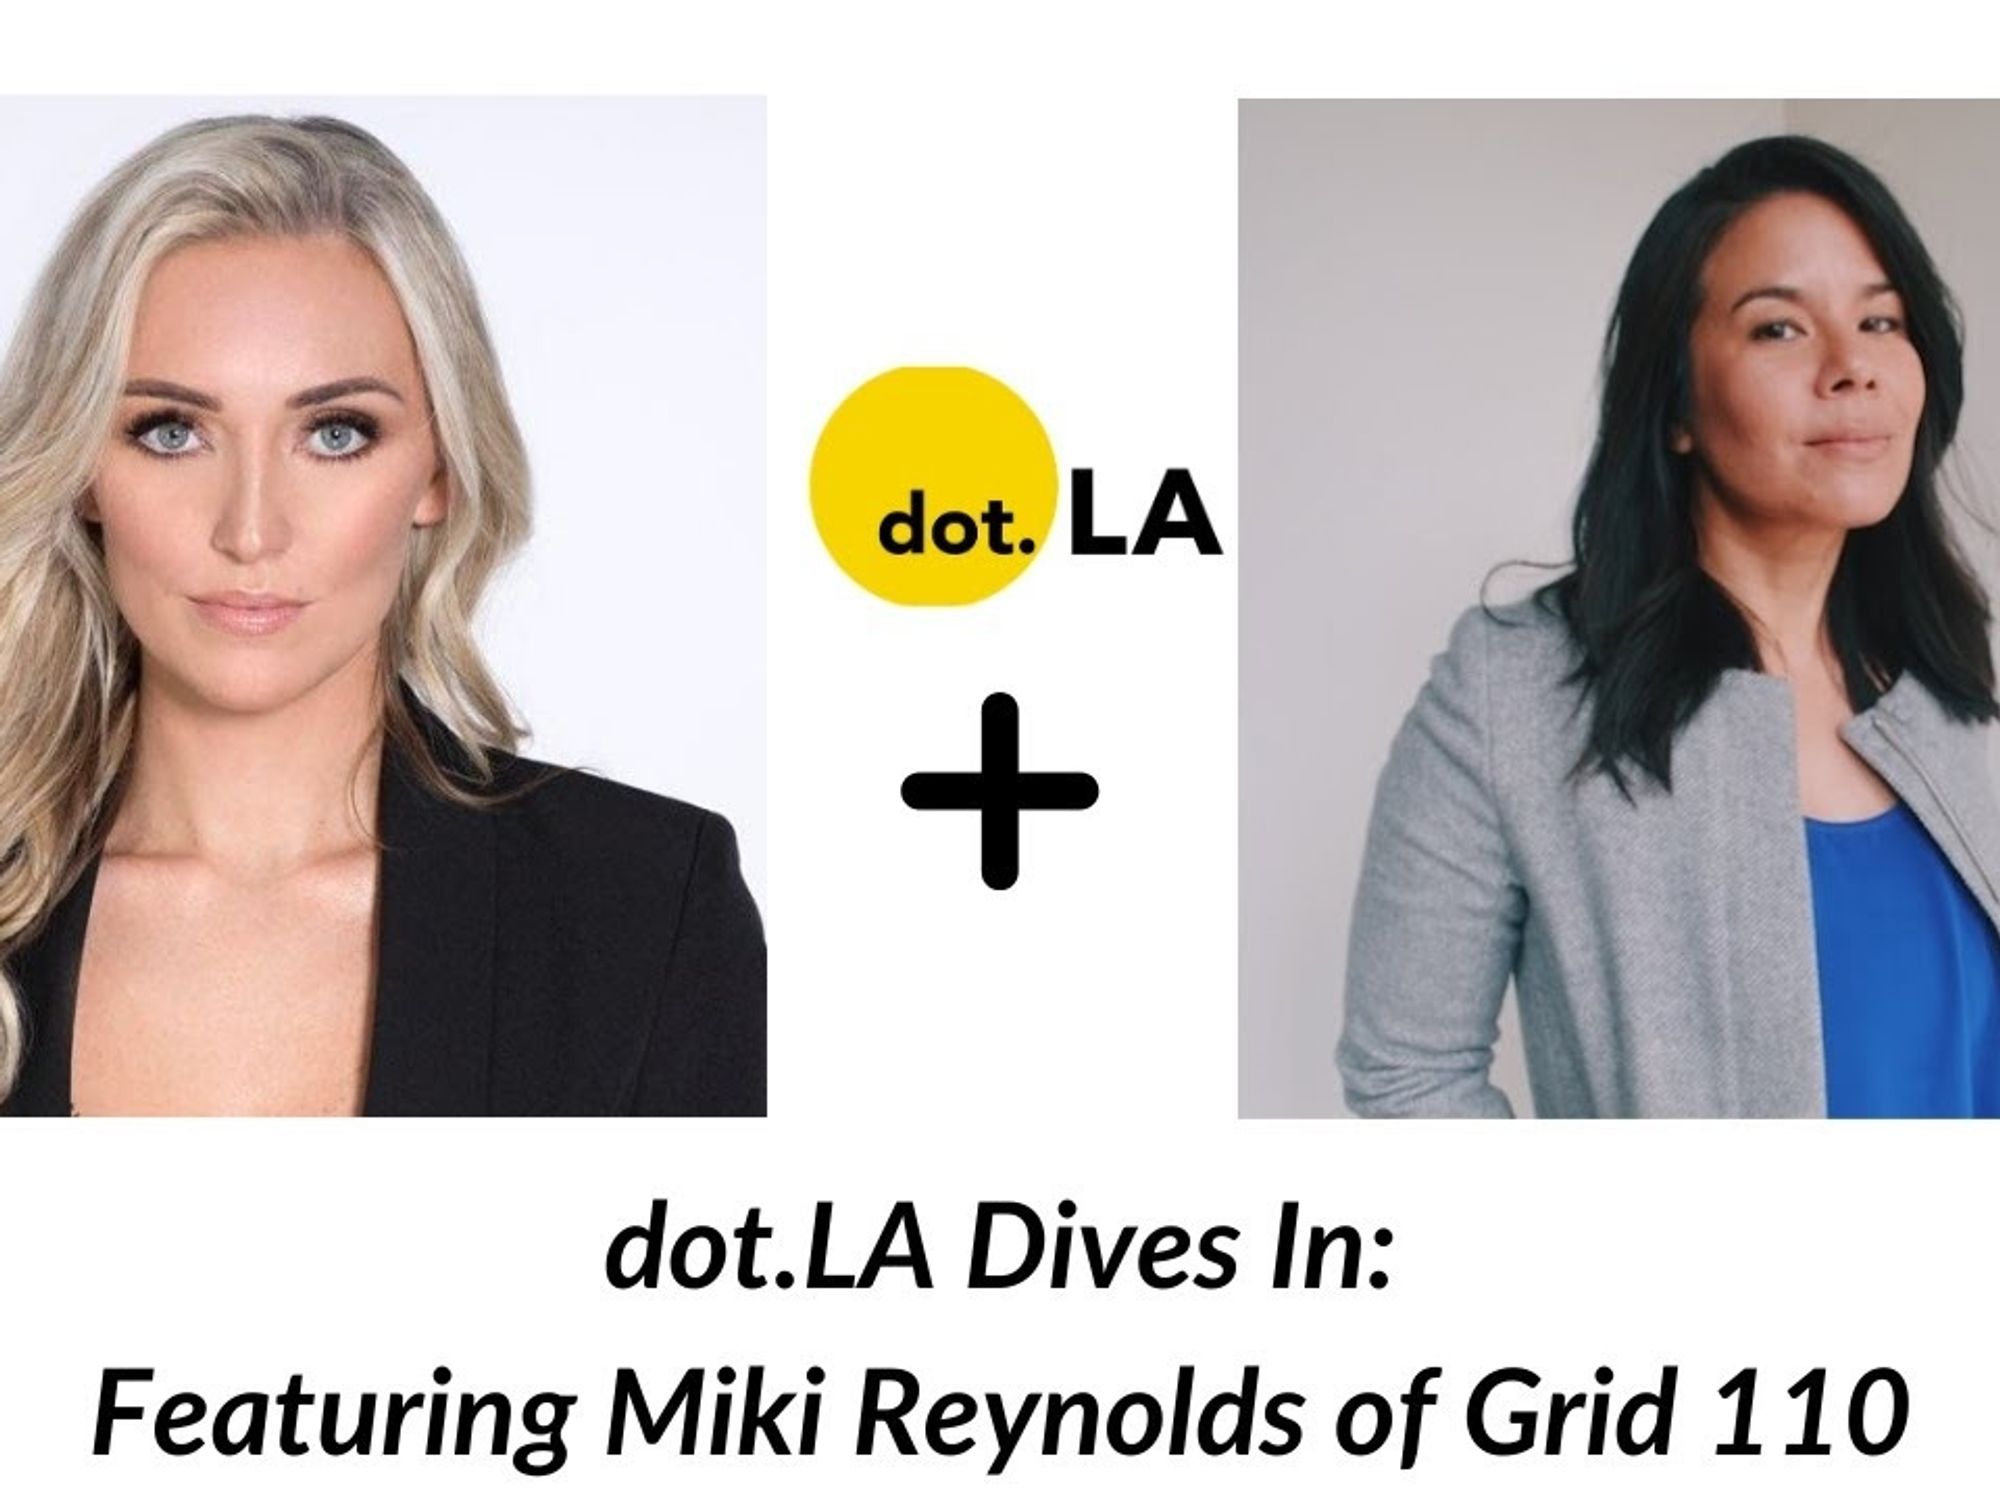 Watch: A Conversation with Miki Reynolds, Executive Director and Co-Founder of Grid110